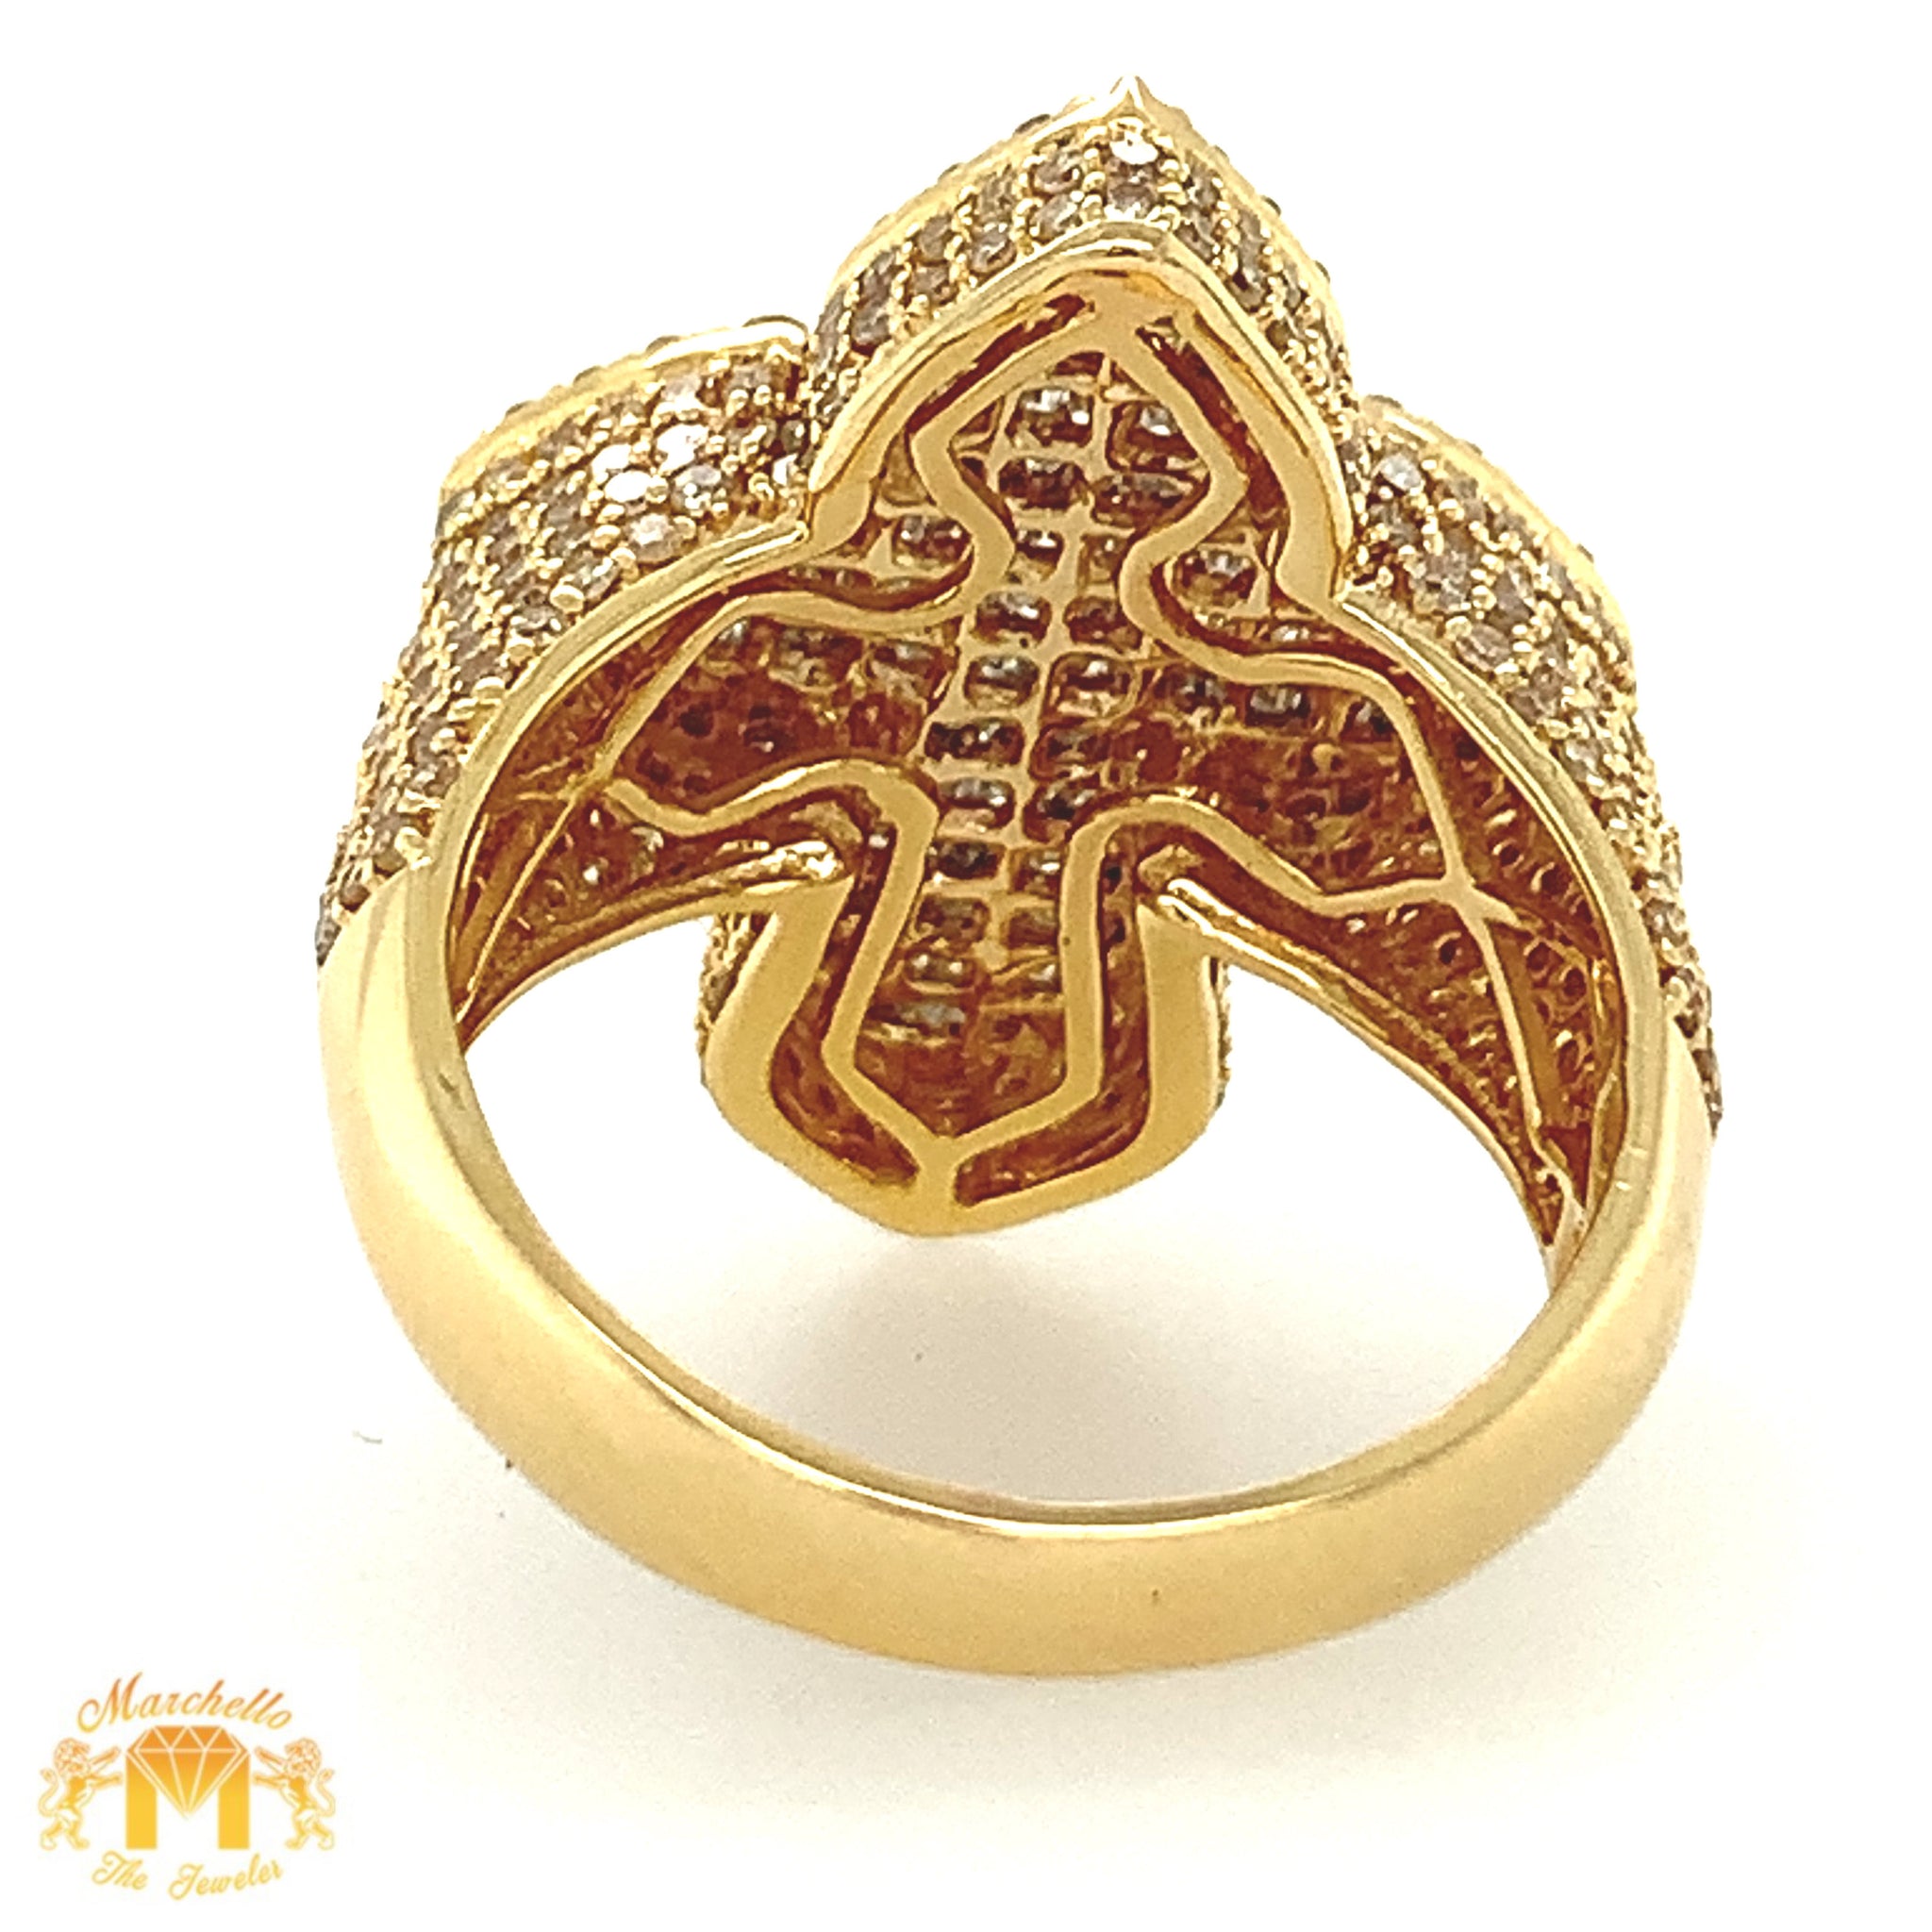 CYTO - 3d Printed Ring - Sterling or Gold-Plated – X Over 0